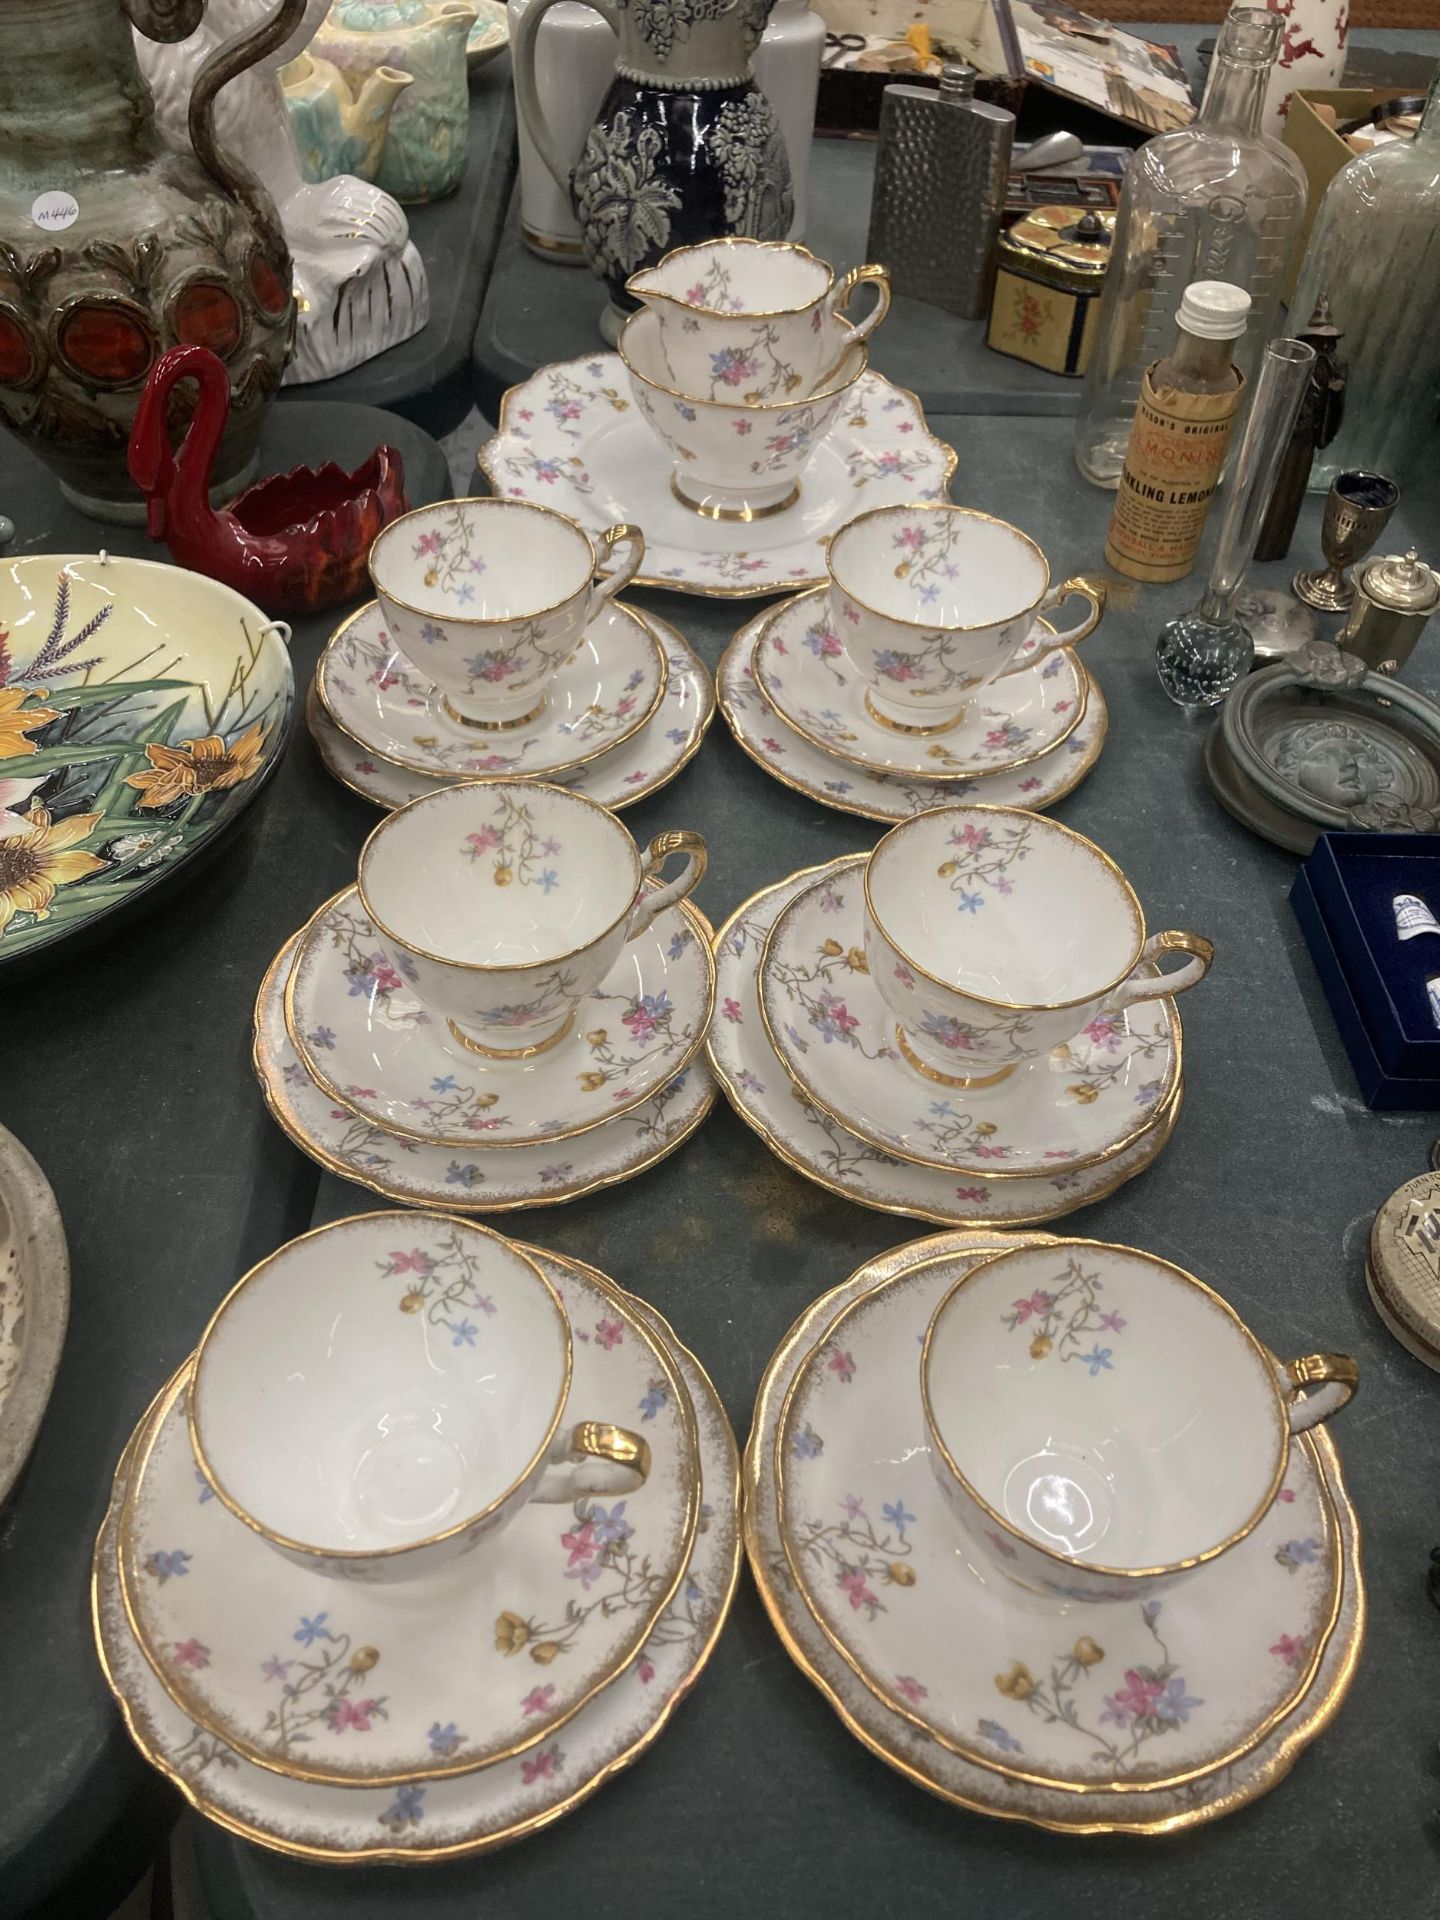 A ROYAL STAFFORD 'VIOLETS POMPADOUR' TEASET TO INCLUDE A CAKE PLATE, CUPS, SAUCERS, SIDE PLATES,